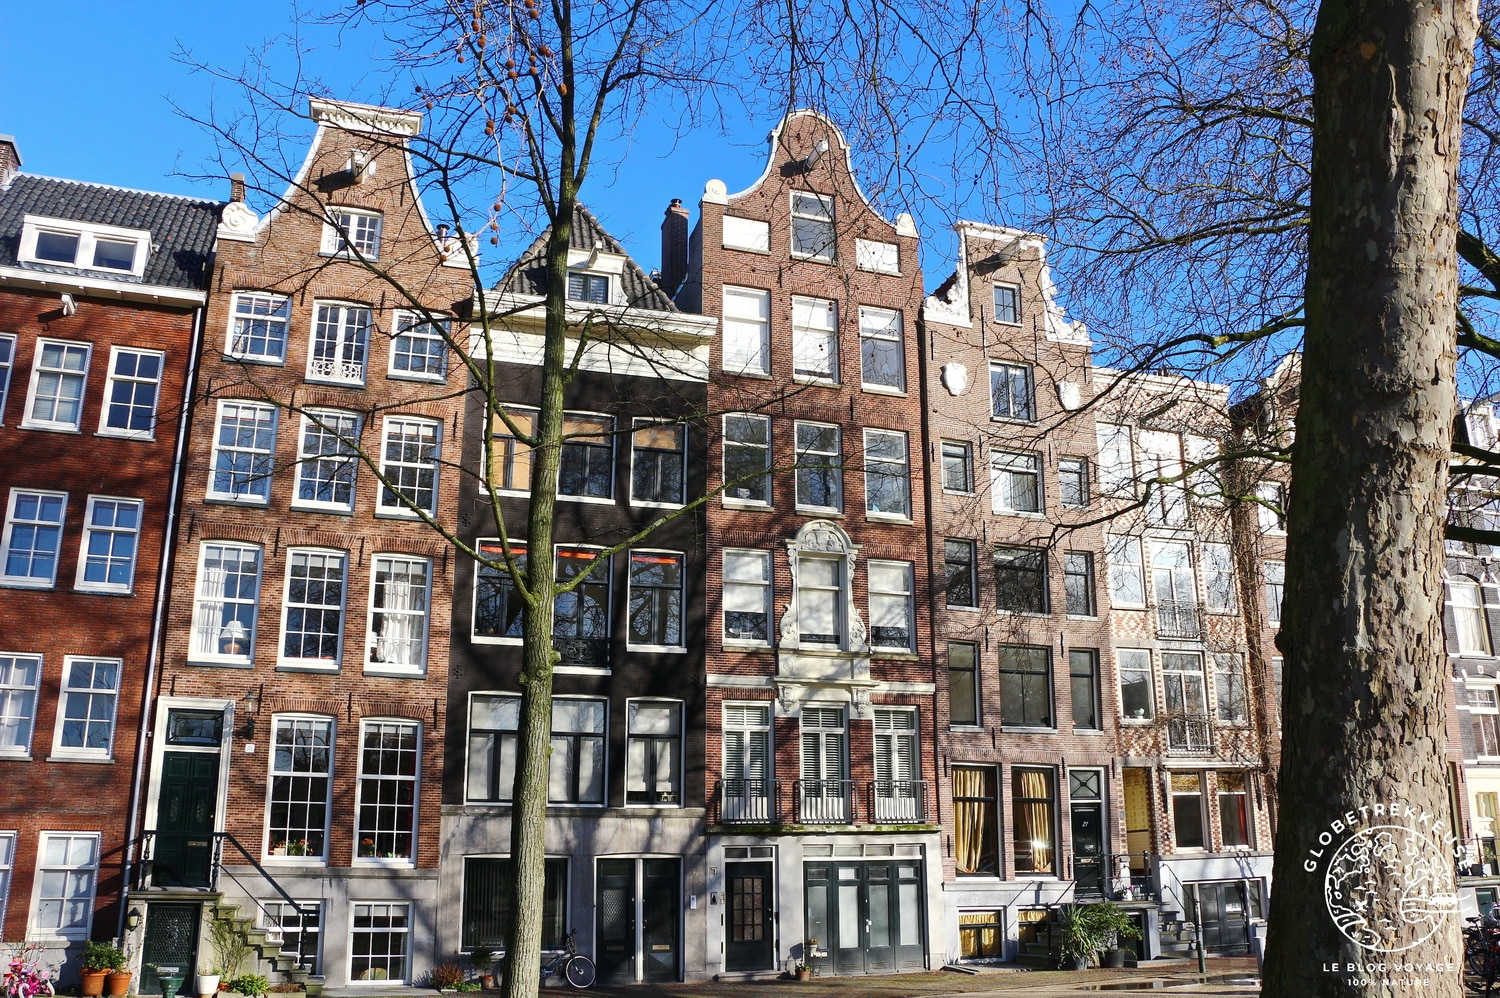 visiter amsterdam 3 jours canaux